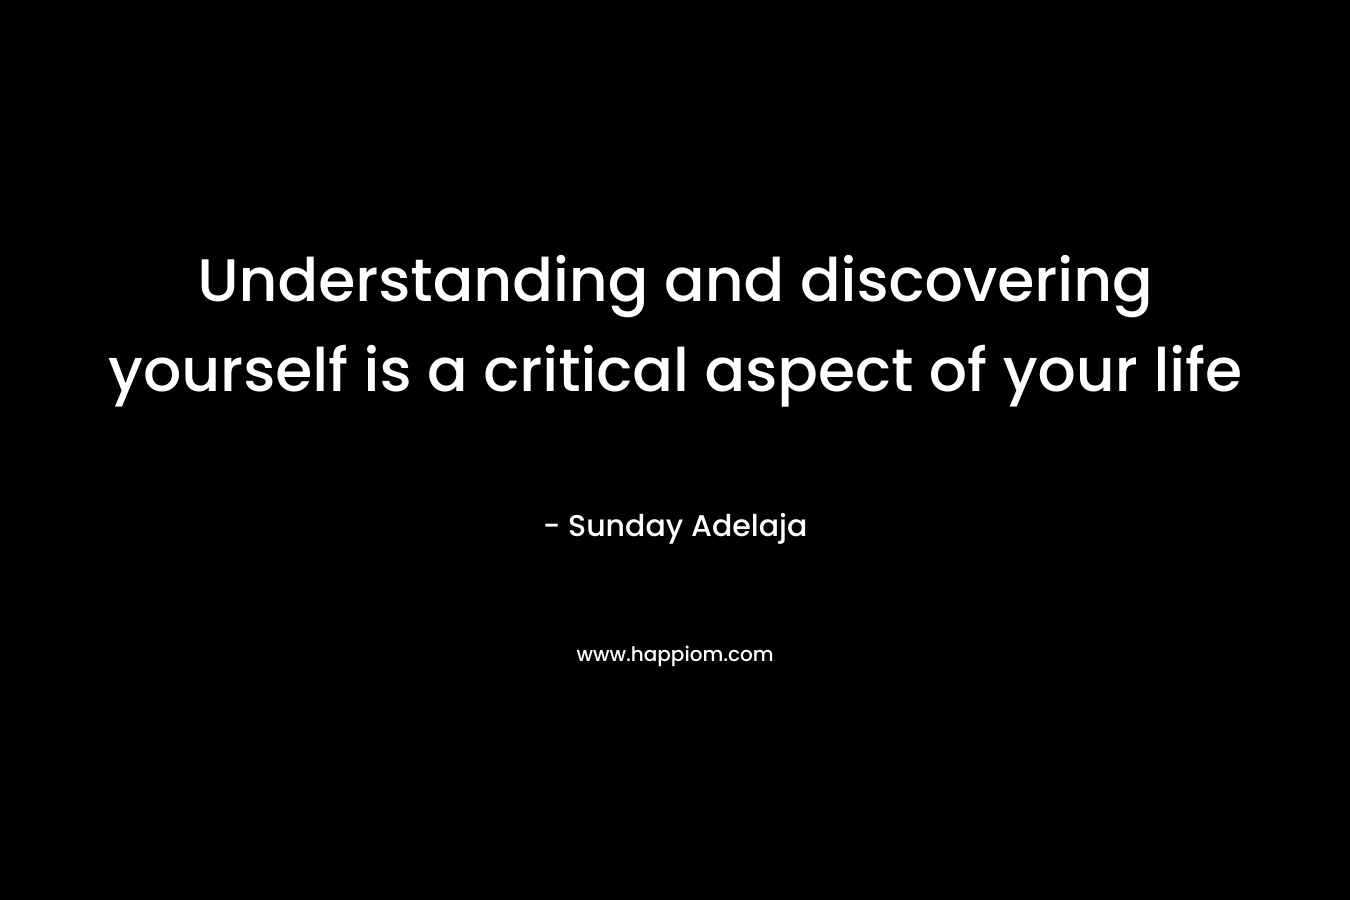 Understanding and discovering yourself is a critical aspect of your life